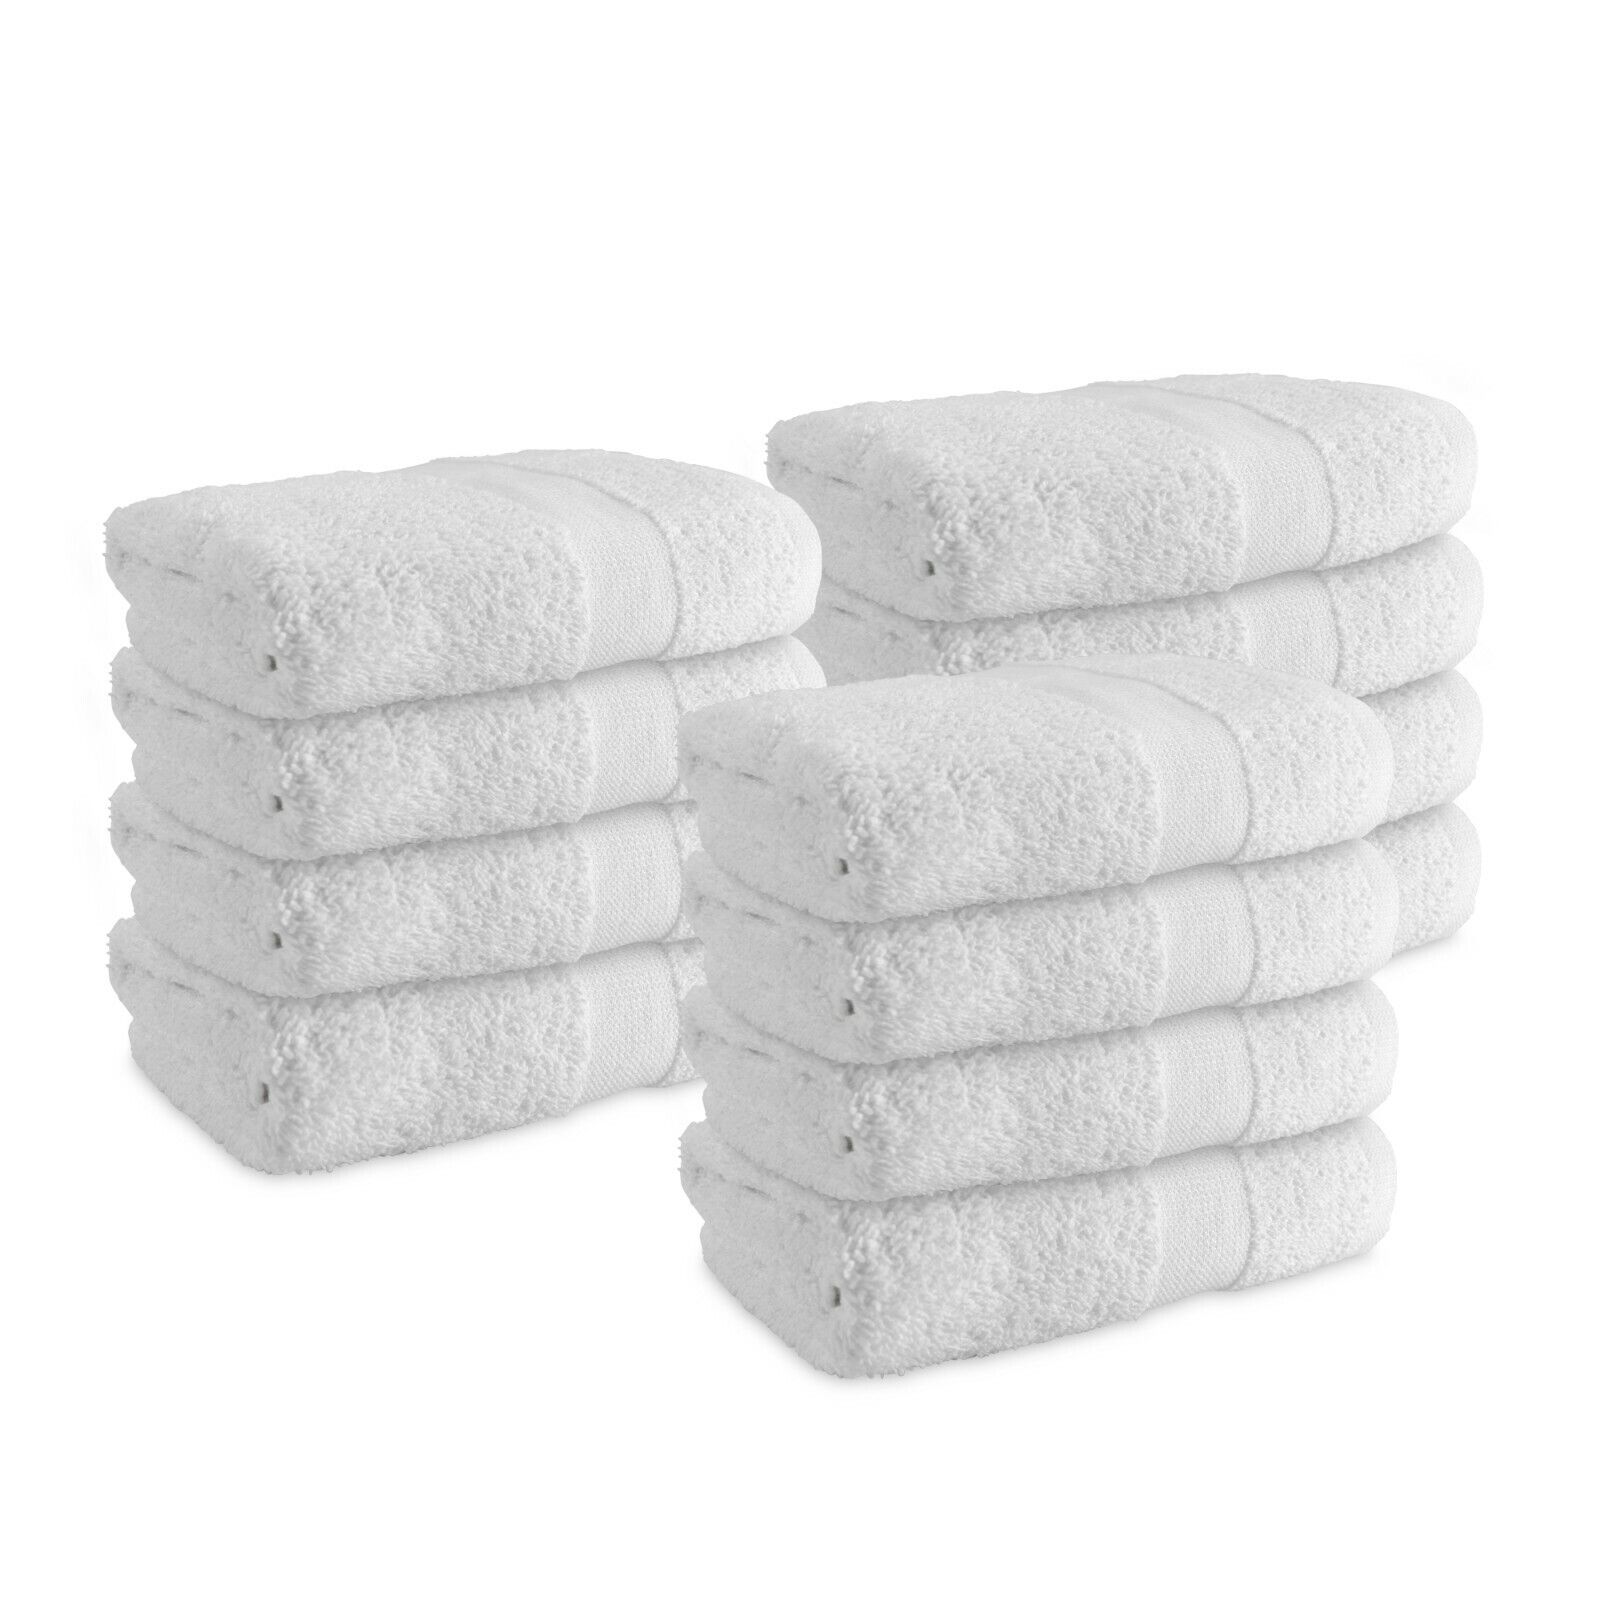 12 Pack of Admiral Hand Towels - White - 16 x 27 - Bulk Bathroom Cotton Towels  Arkwright